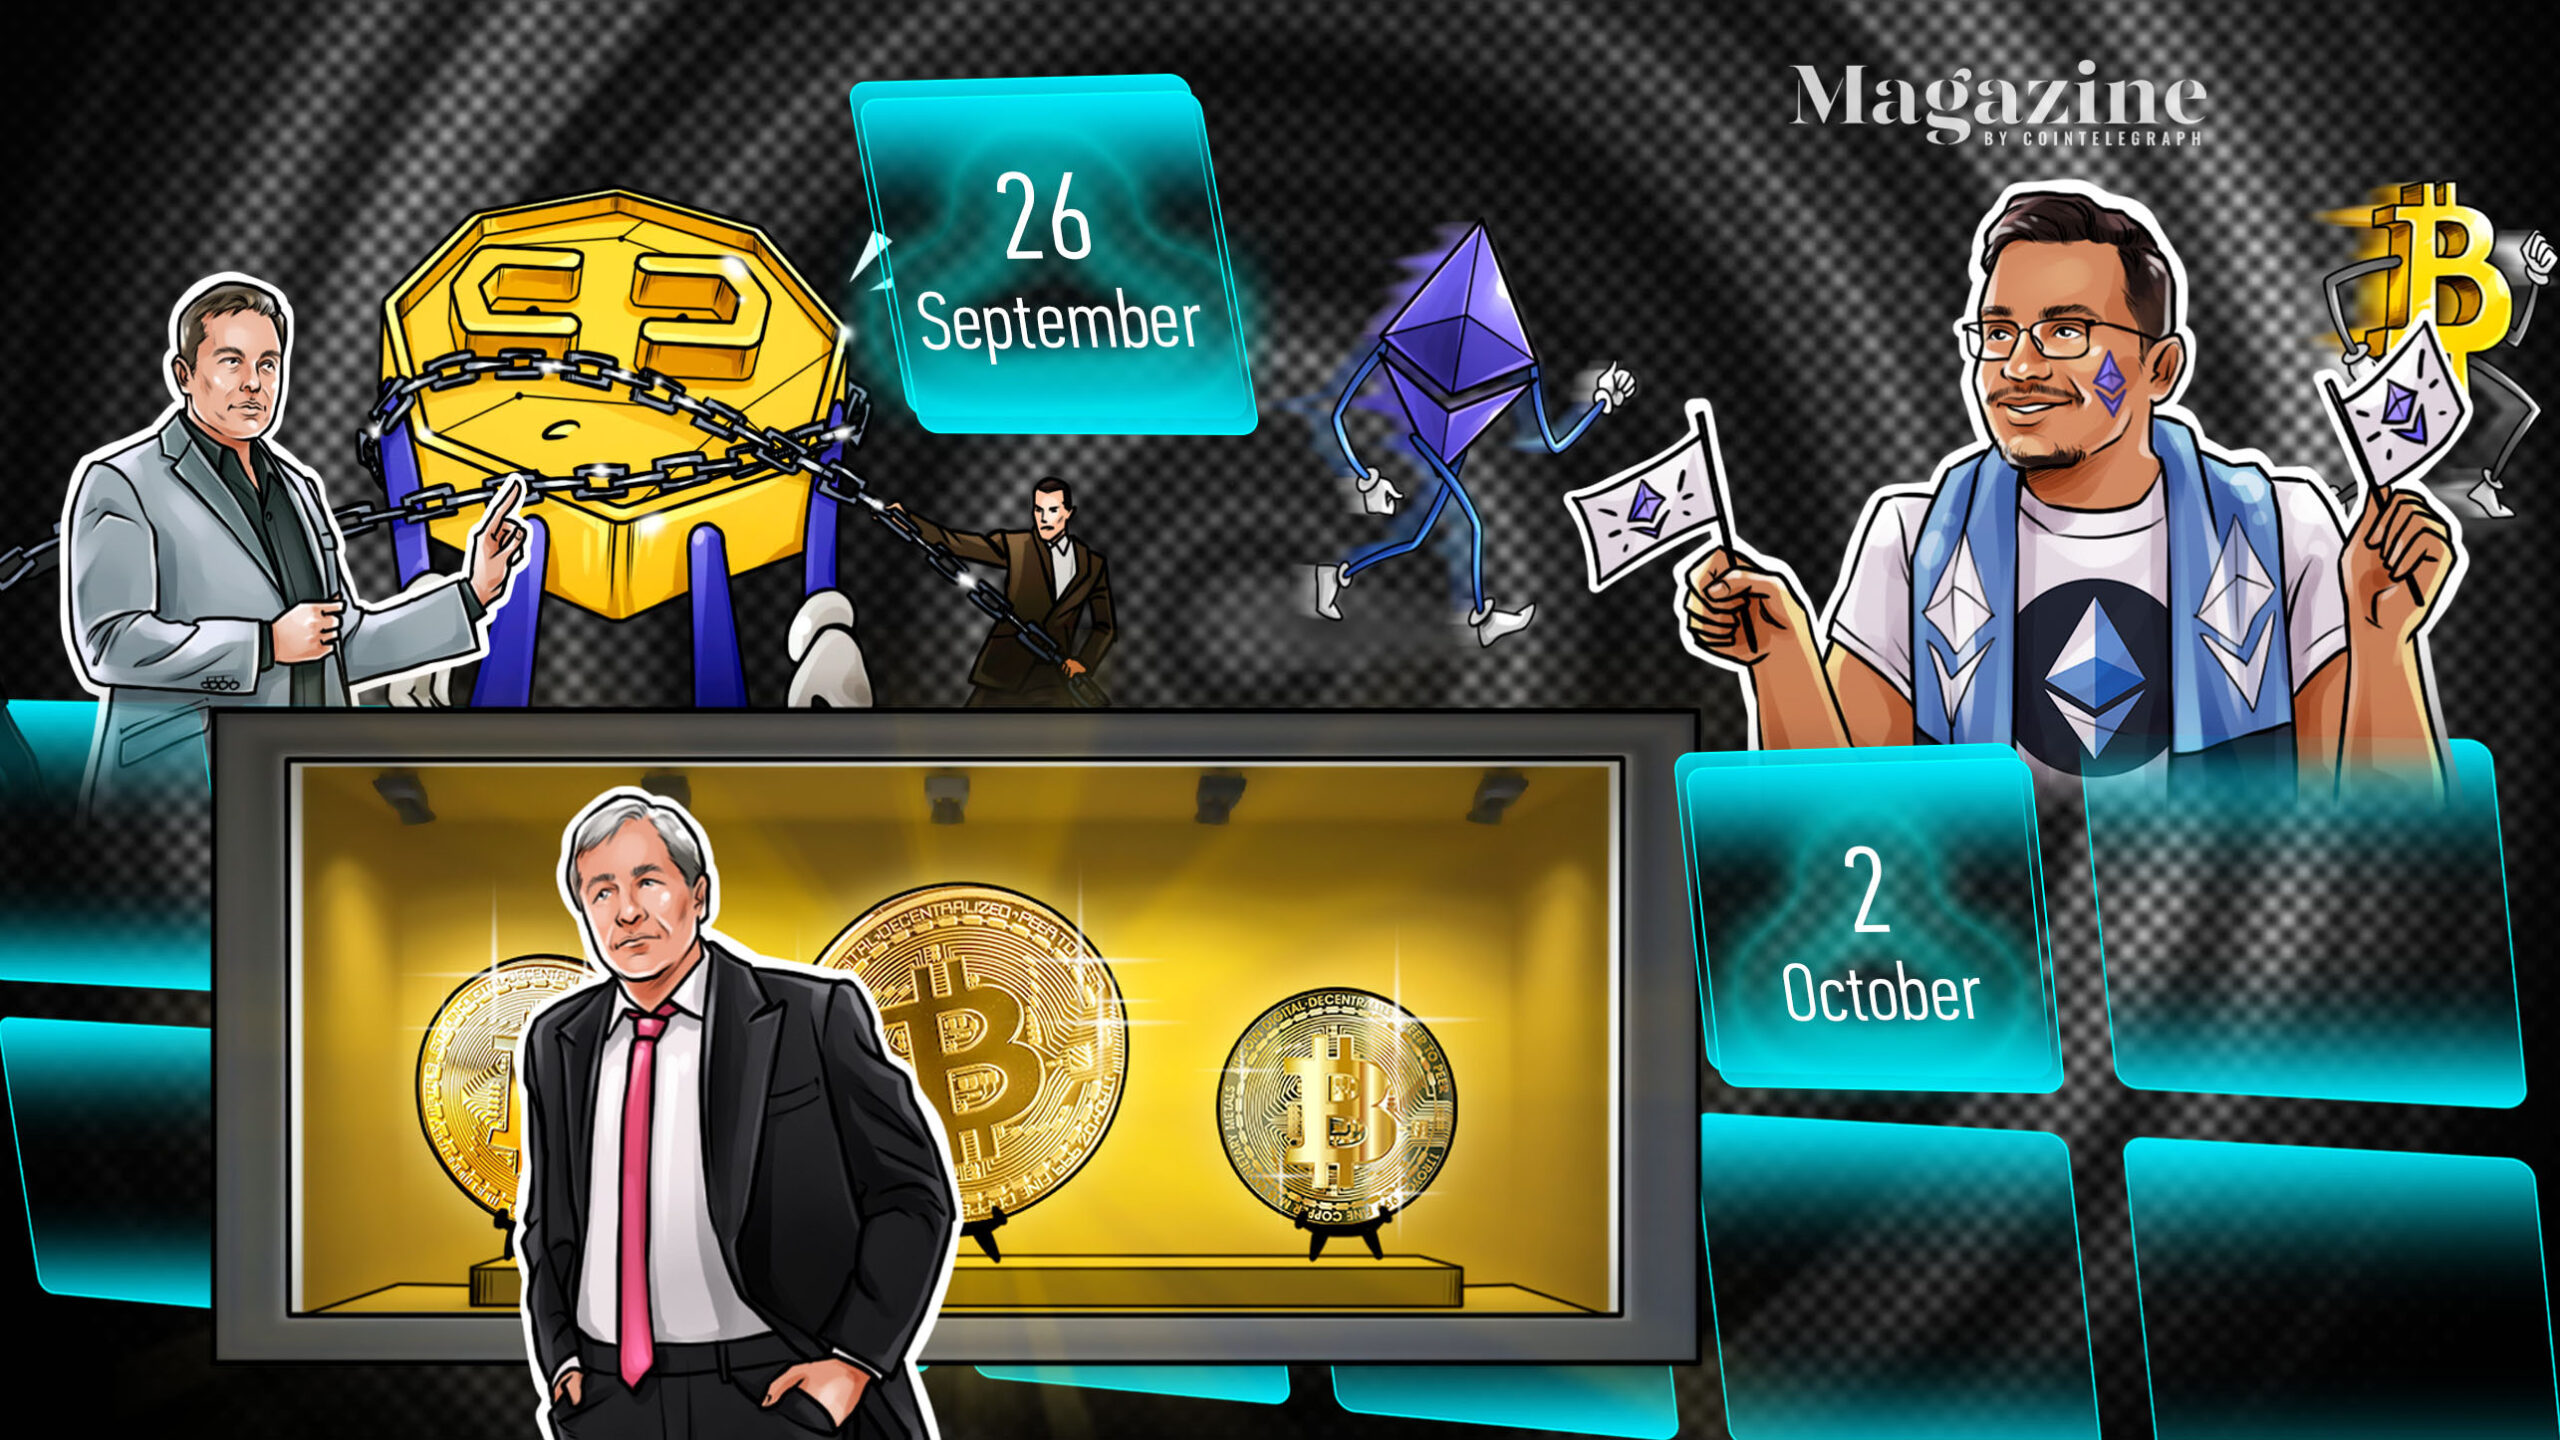 Morgan-stanley-acquires-more-gbtc,-alibaba-to-halt-crypto-mining-gear-sales,-and-a-possible-scenario-for-$6-million-btc:-hodler’s-digest,-sept-26-oct.-2